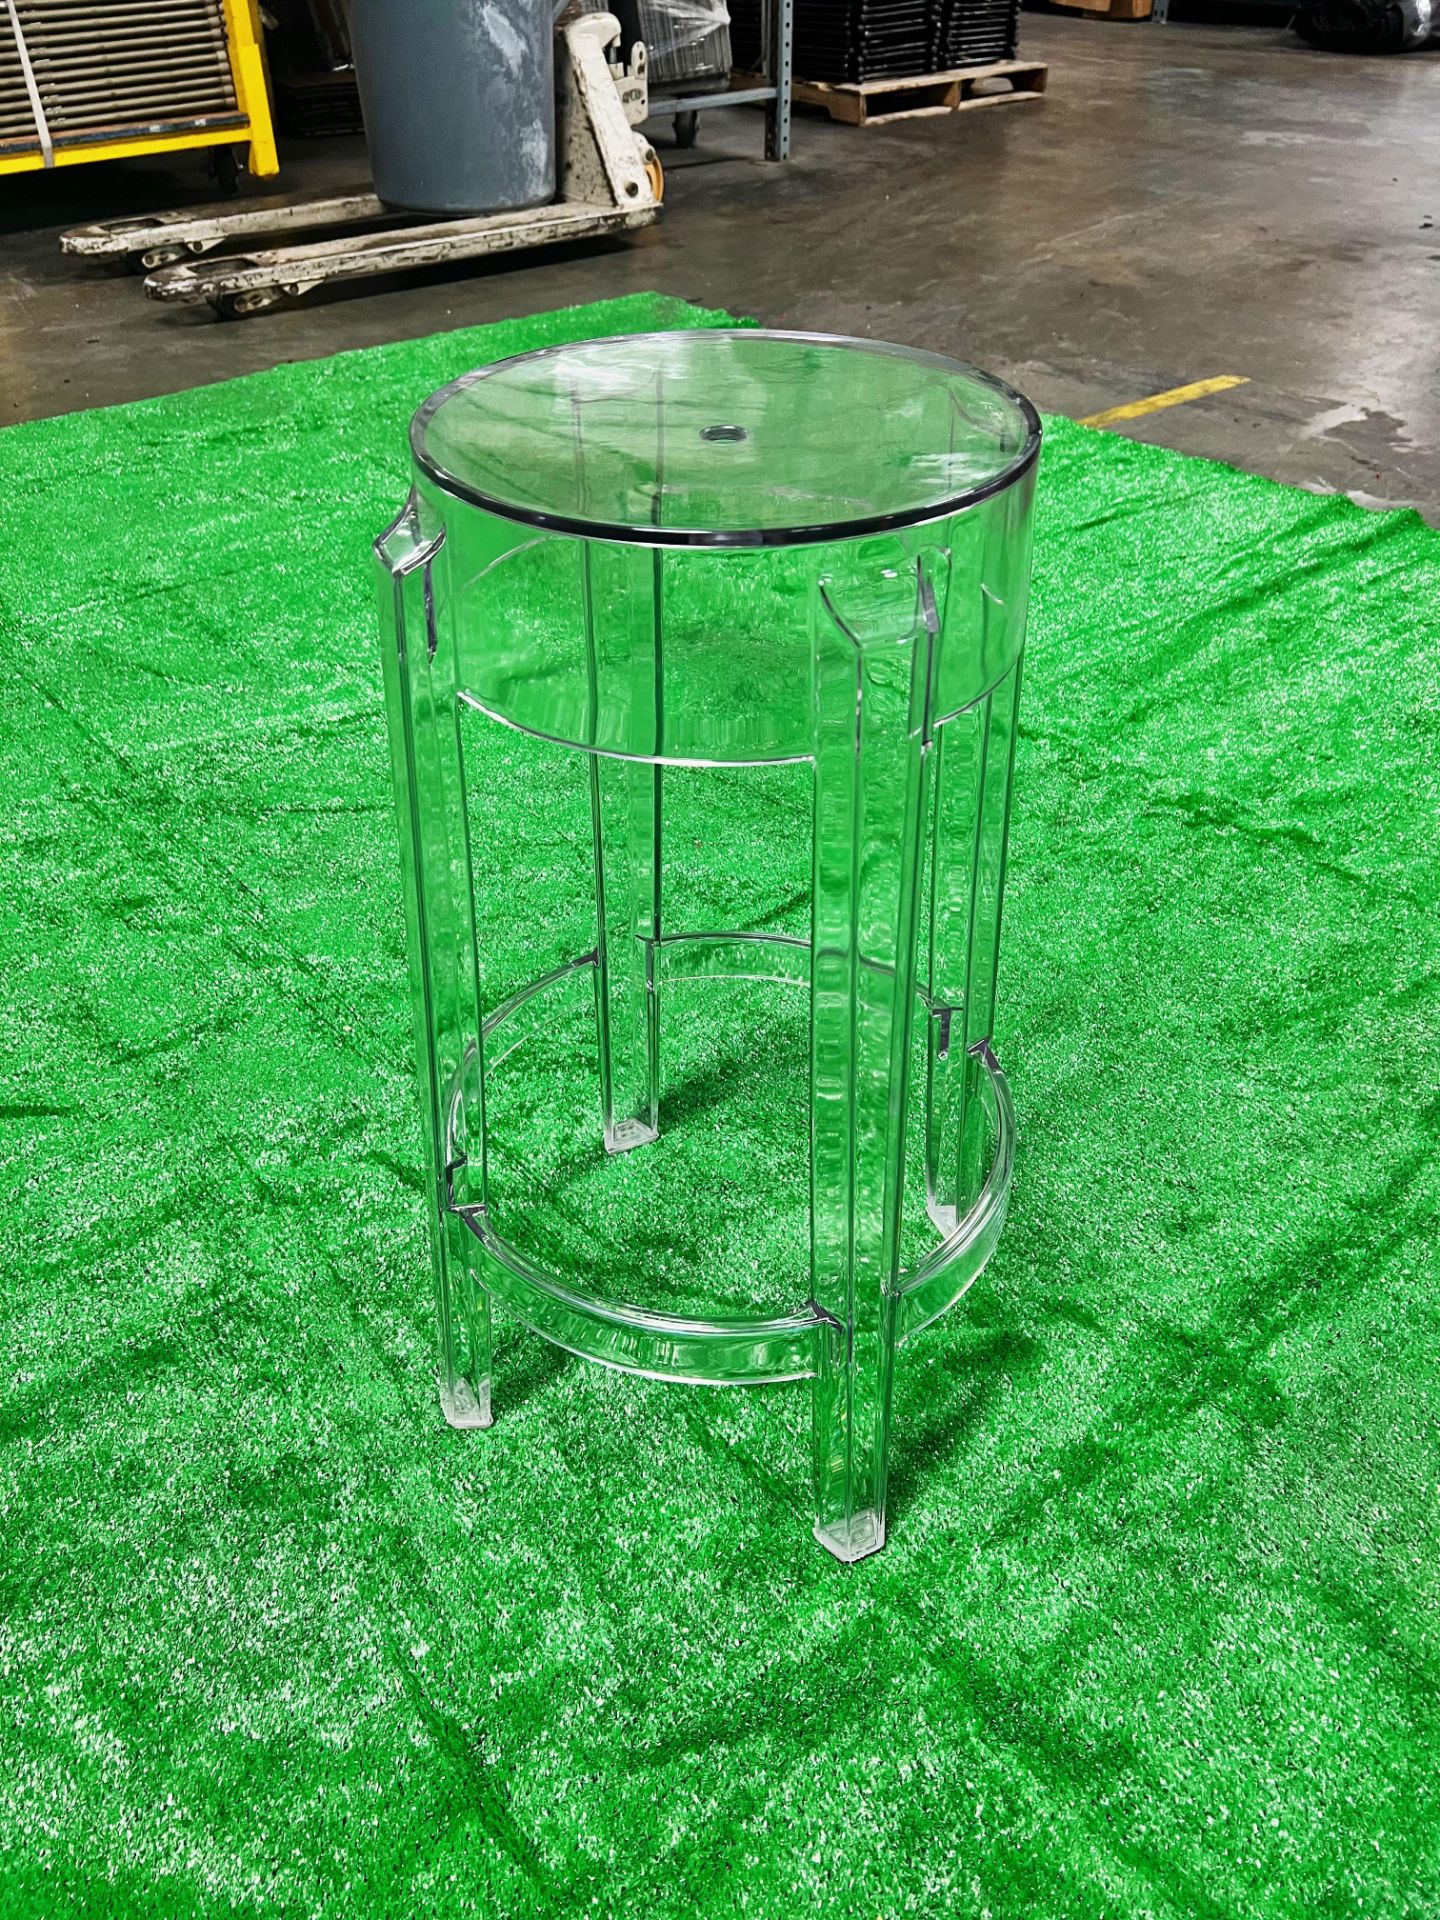 Polycarbonate 24" Barstool, New in box